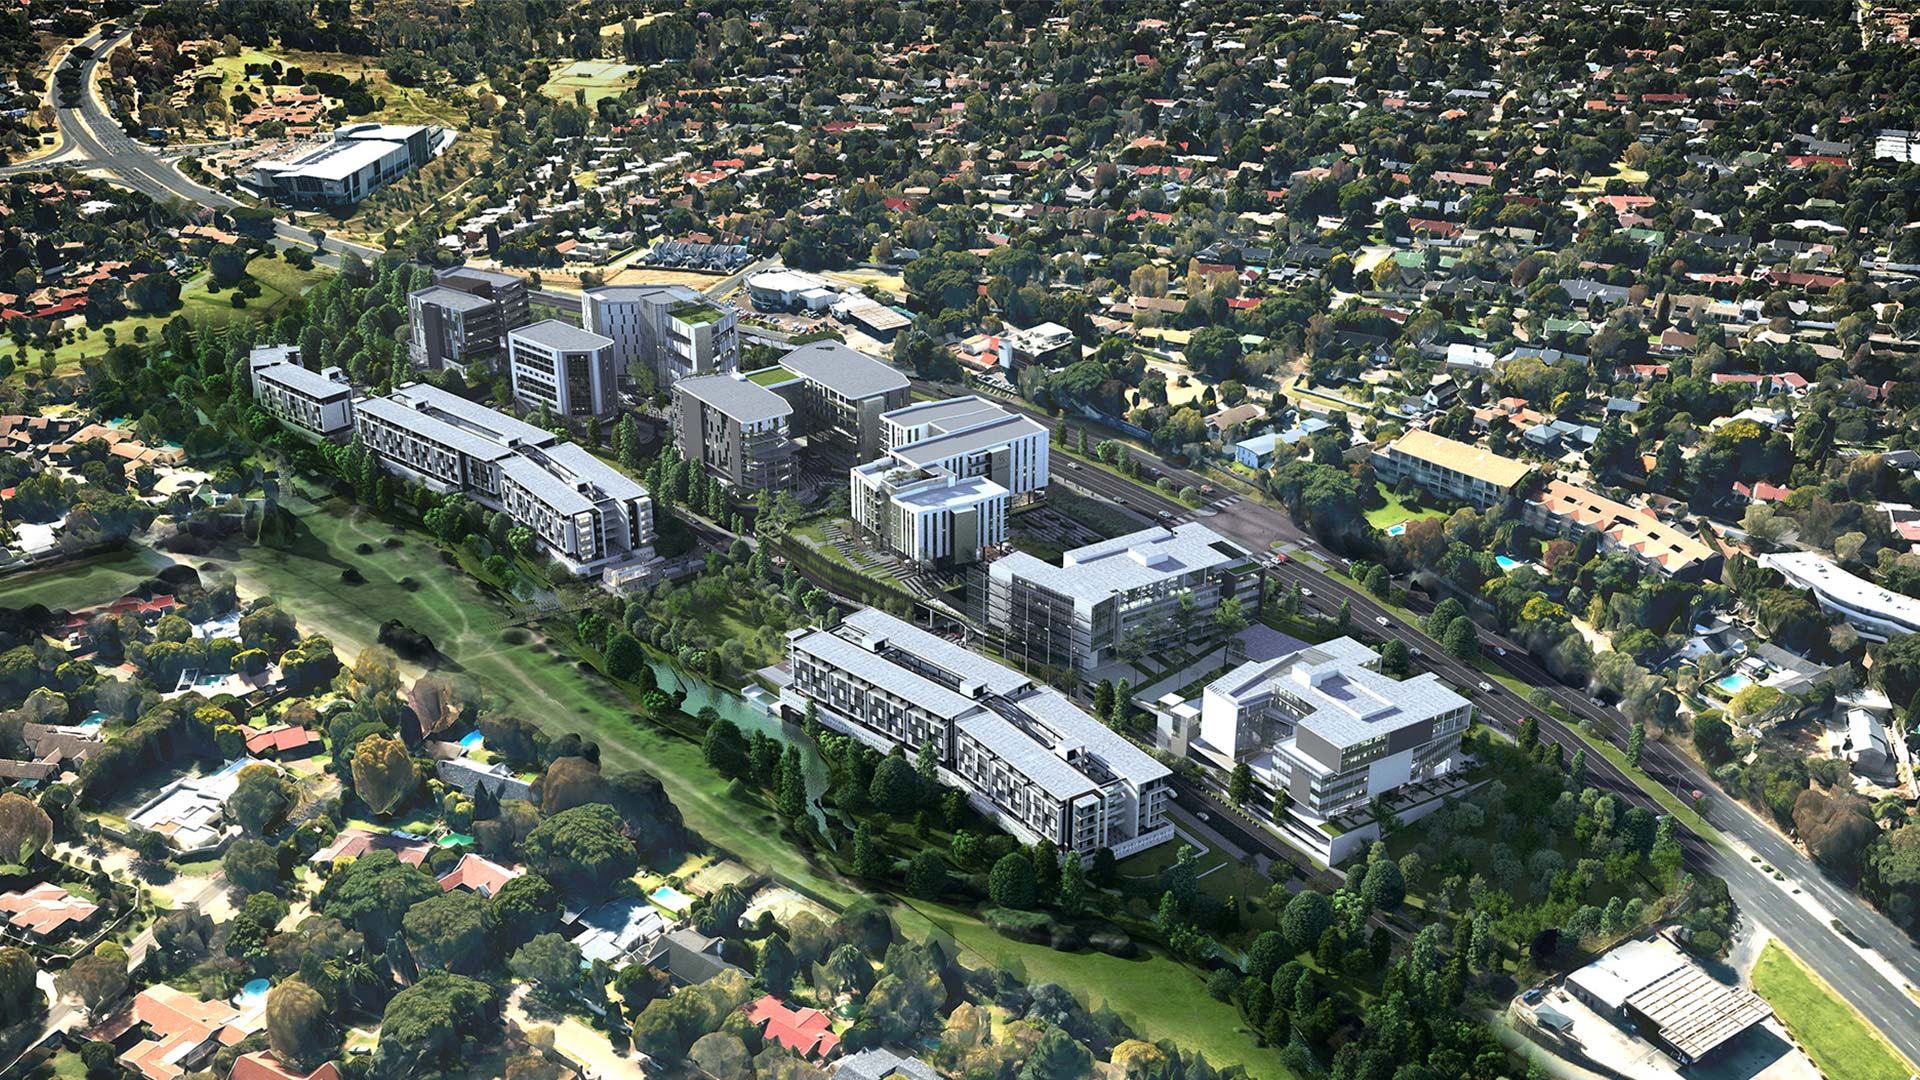 Sandton Gate is a new development in Sandton with both residential and commercial properties